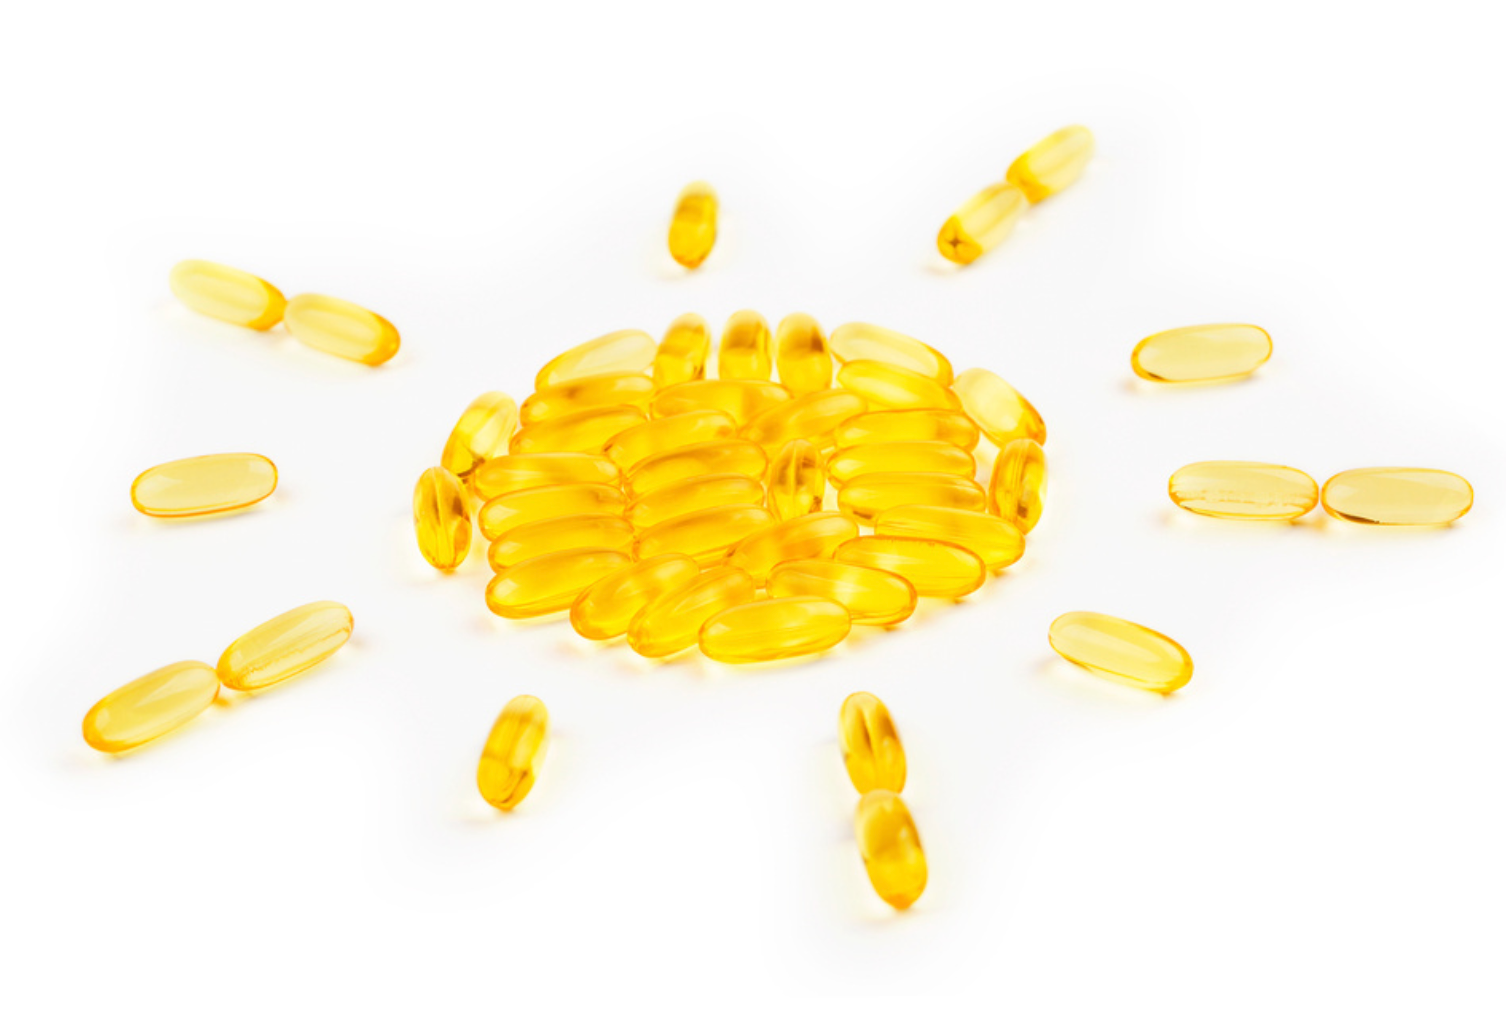 Vitamin D Intoxication from Supplements Both Possible and Harmful, Physicians Report